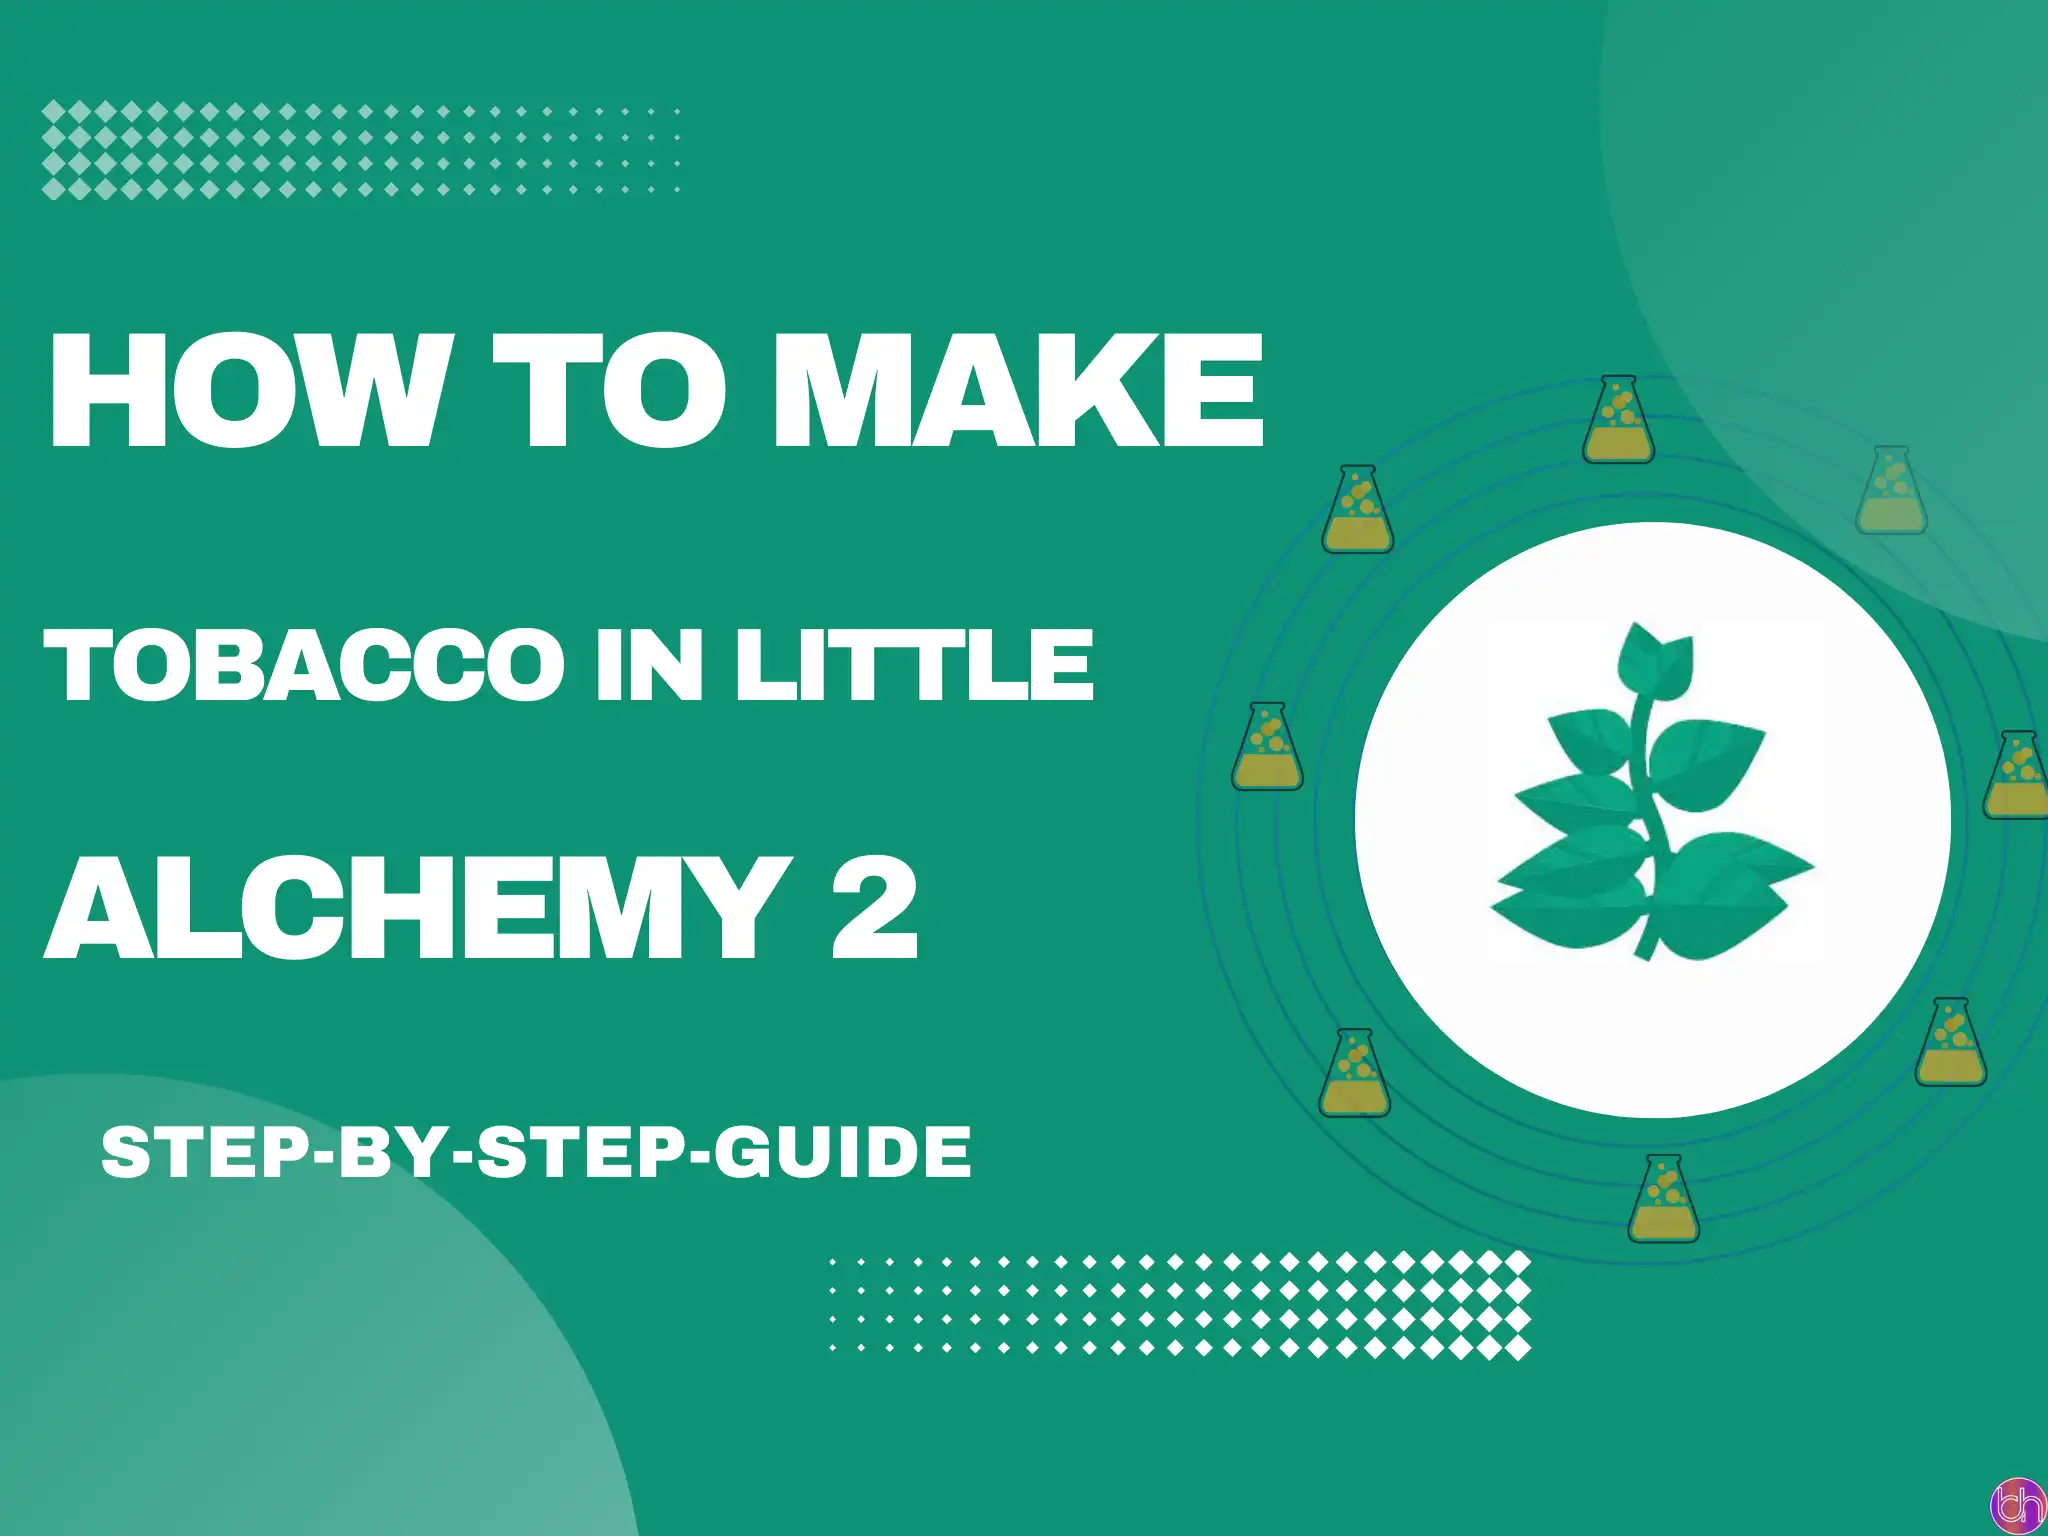 How to make Tobacco in Little Alchemy 2